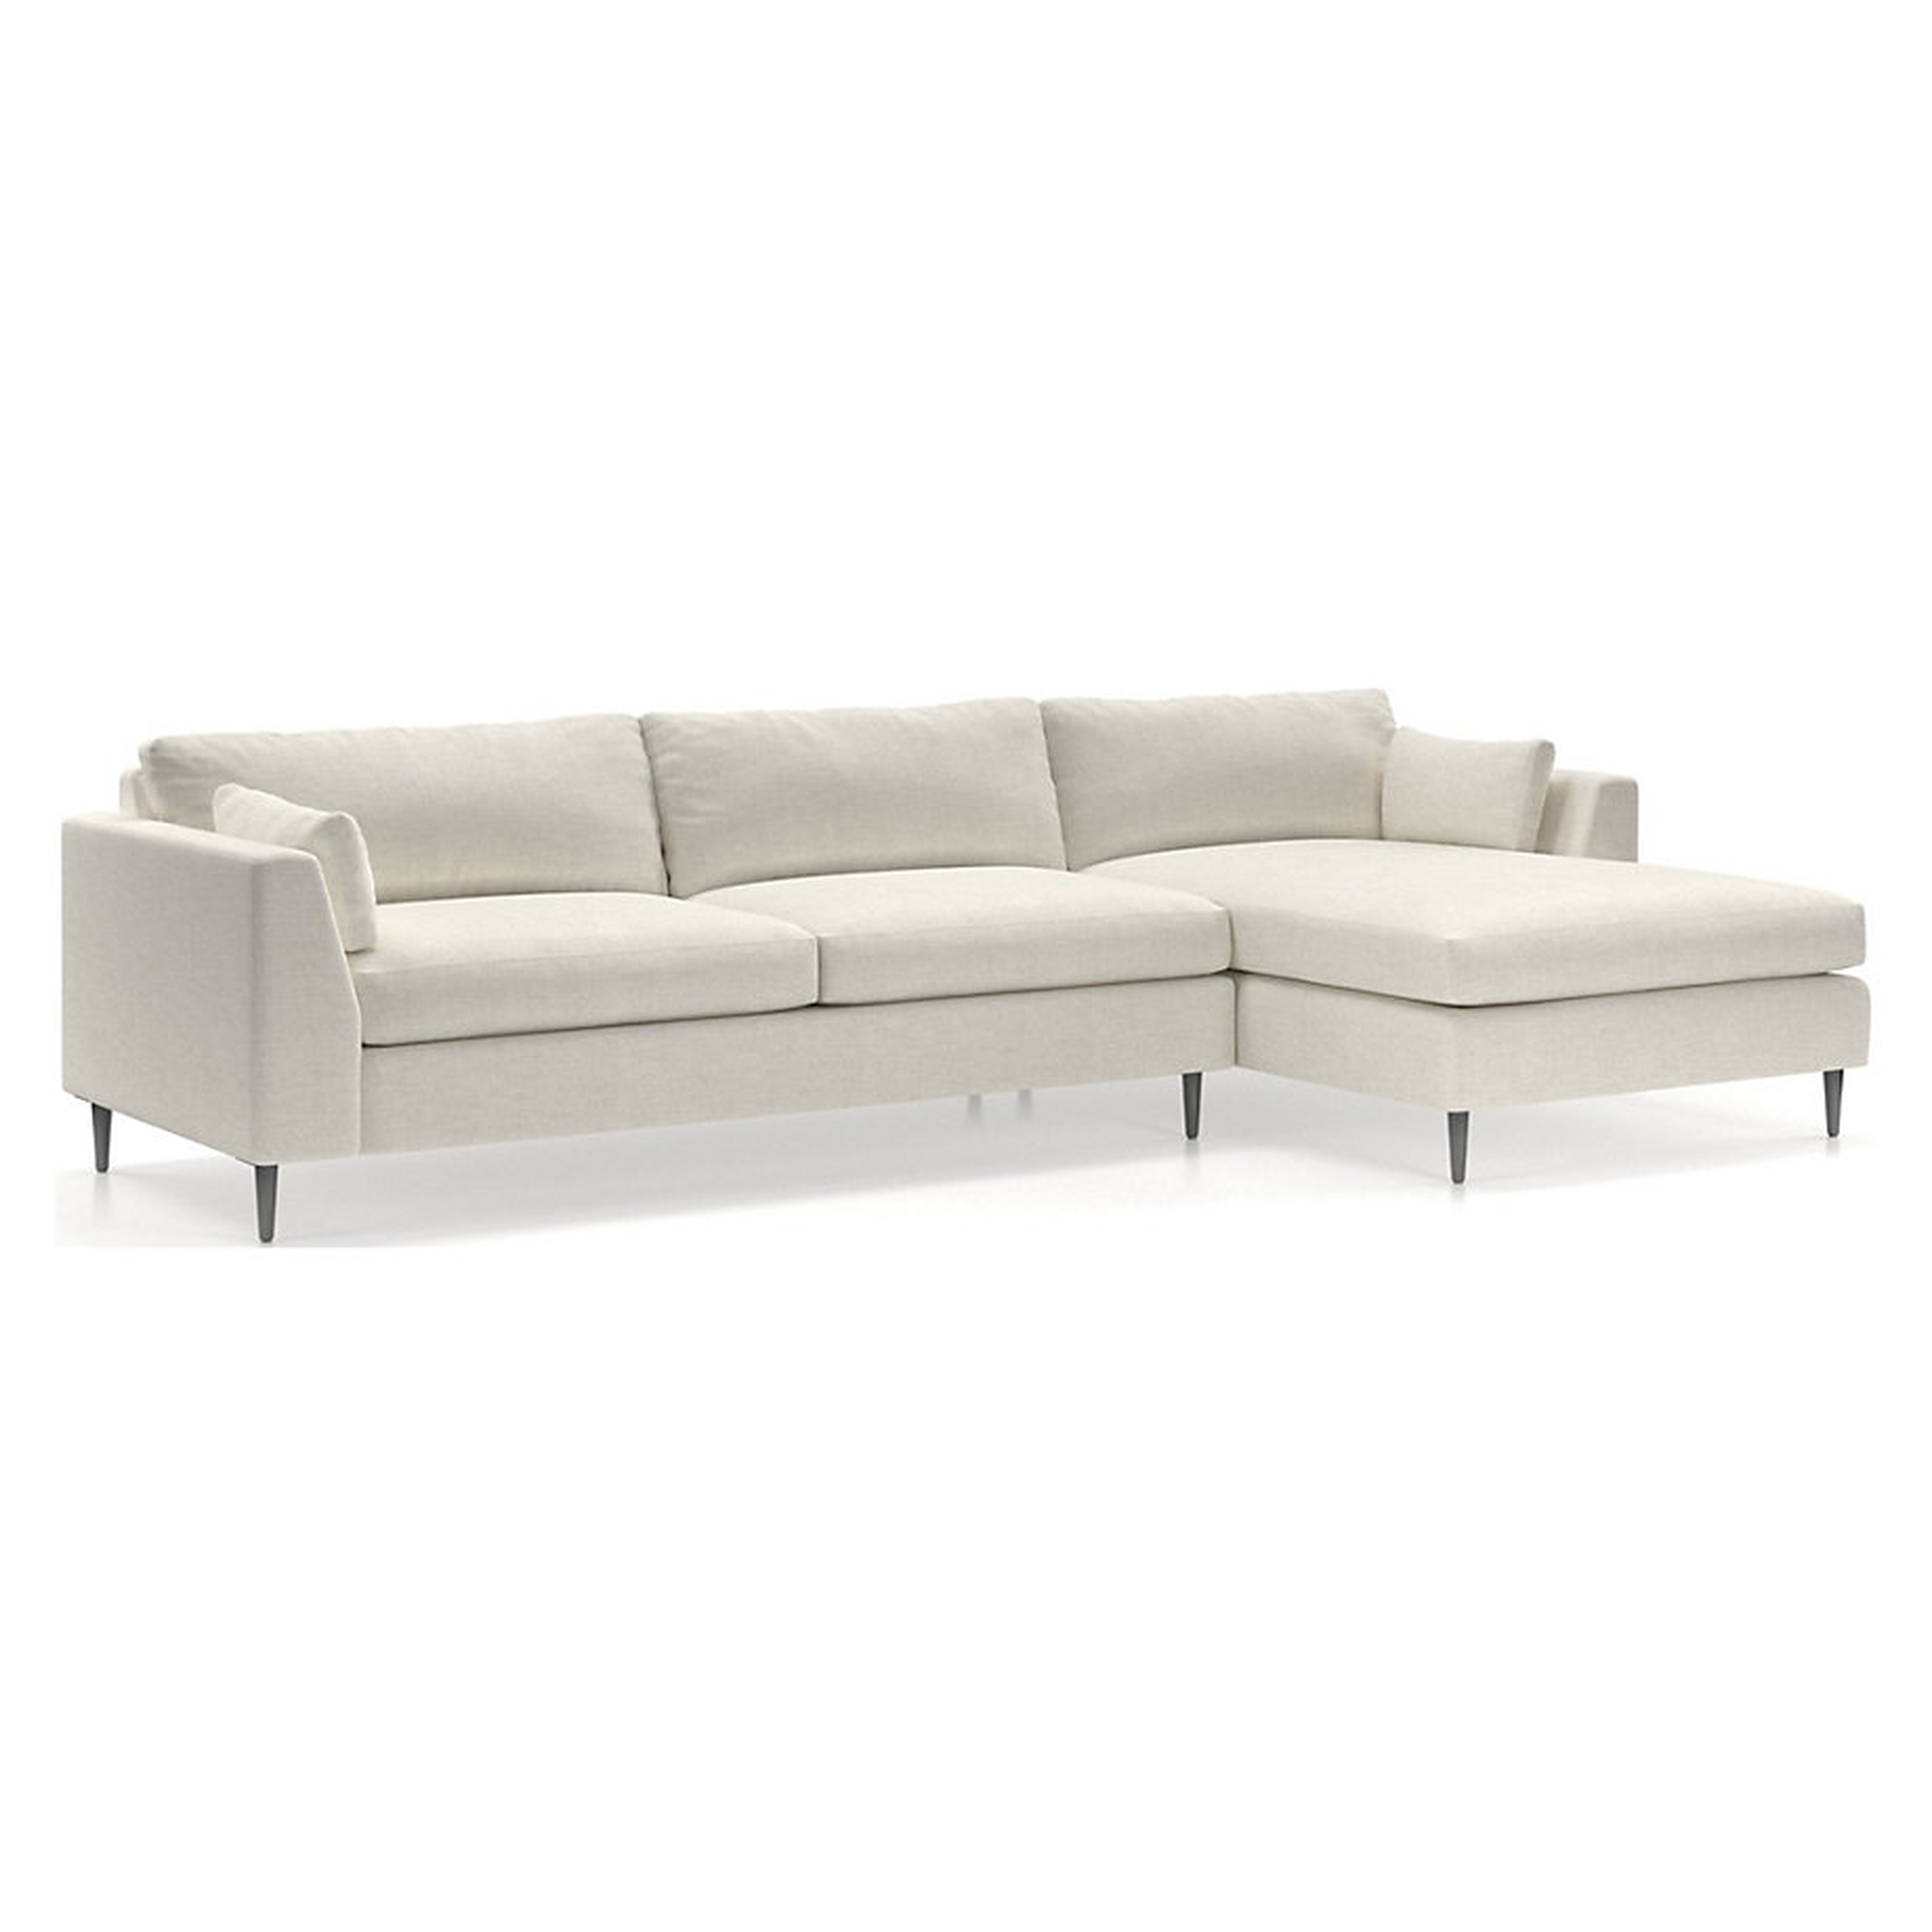 Avondale Wood Leg 2-Piece Sectional Sofa - Crate and Barrel